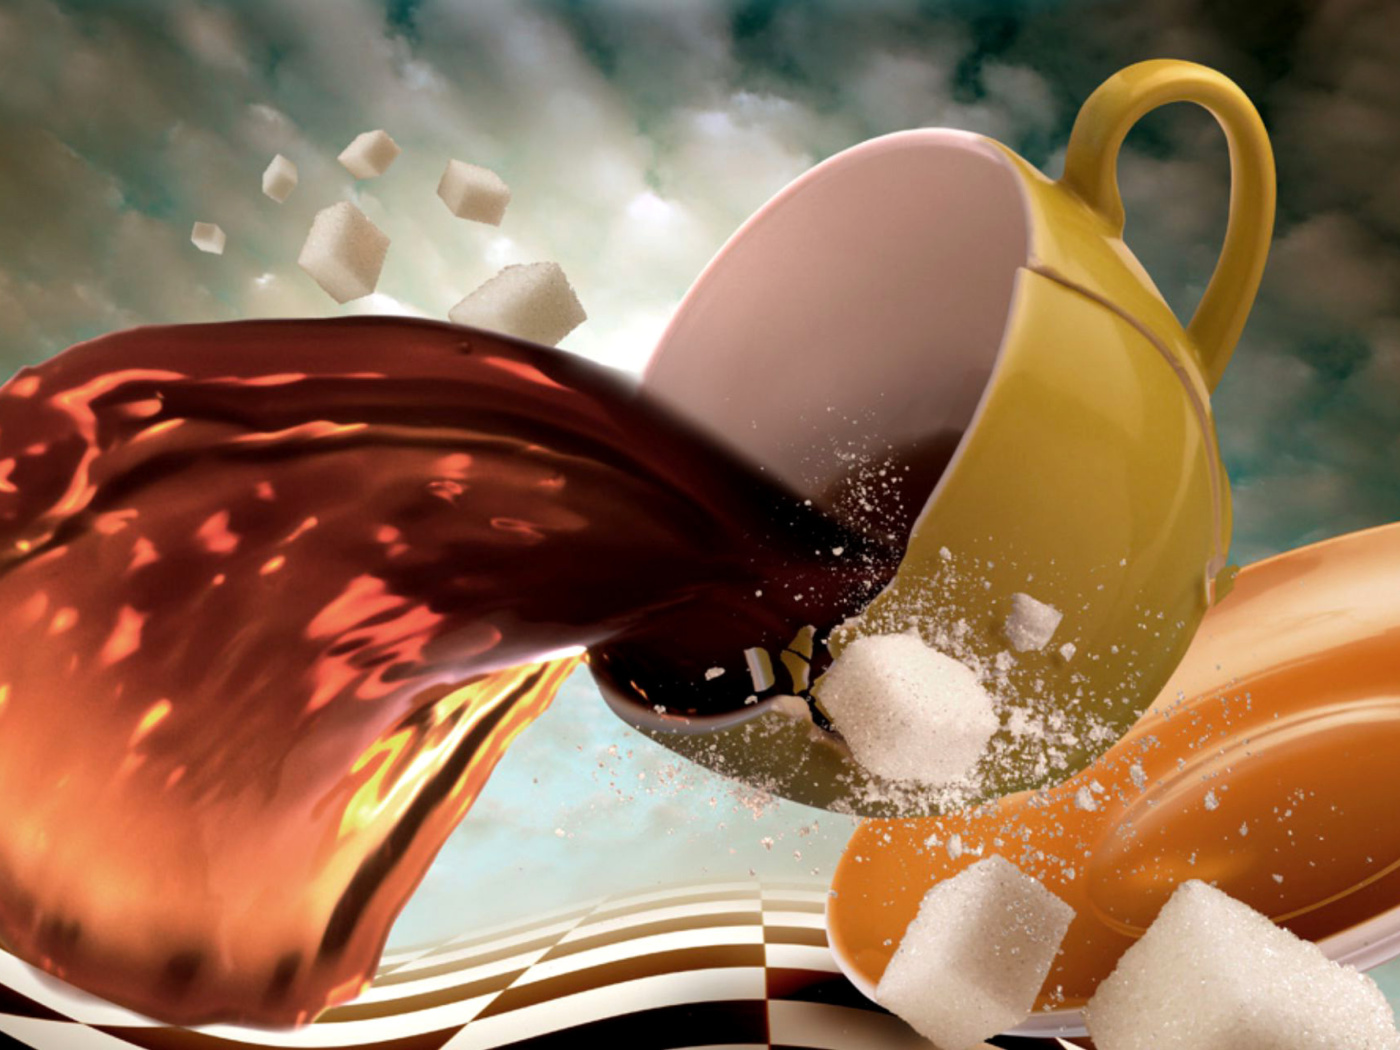 Surrealism Coffee Cup with Sugar cubes screenshot #1 1400x1050